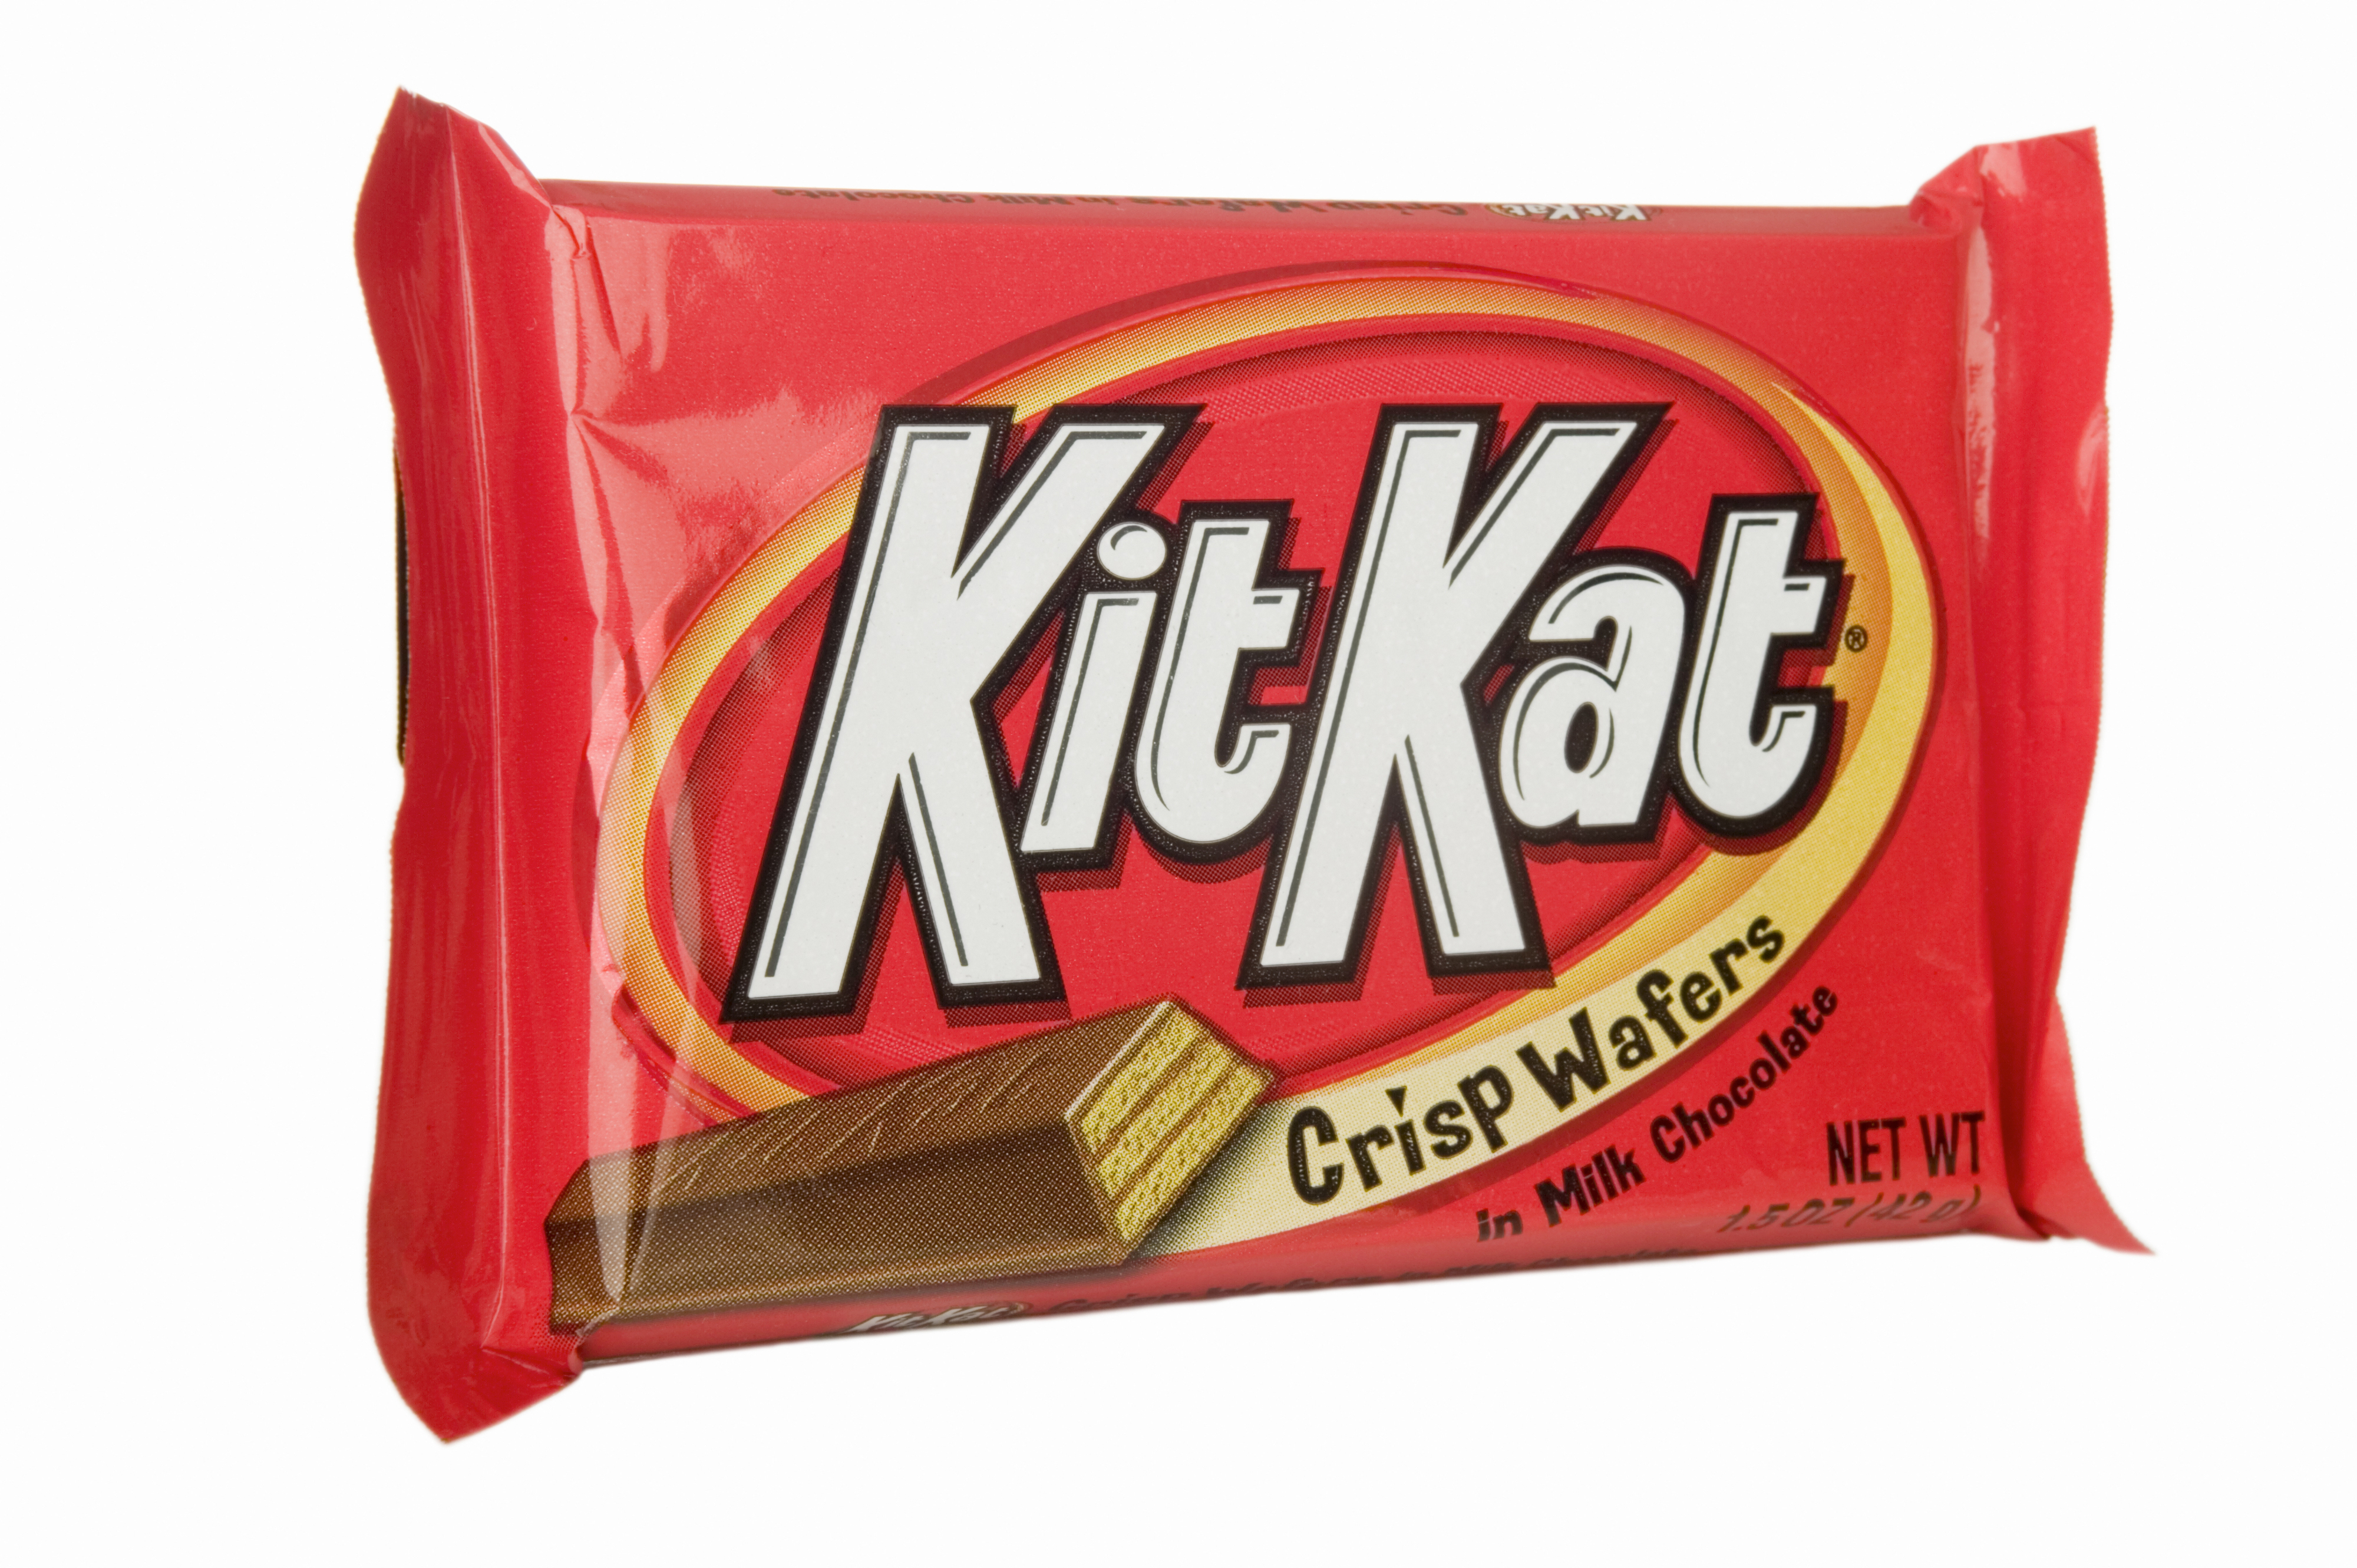 KitKat chocolate bar packaging with logo and a glimpse of the chocolate wafers inside